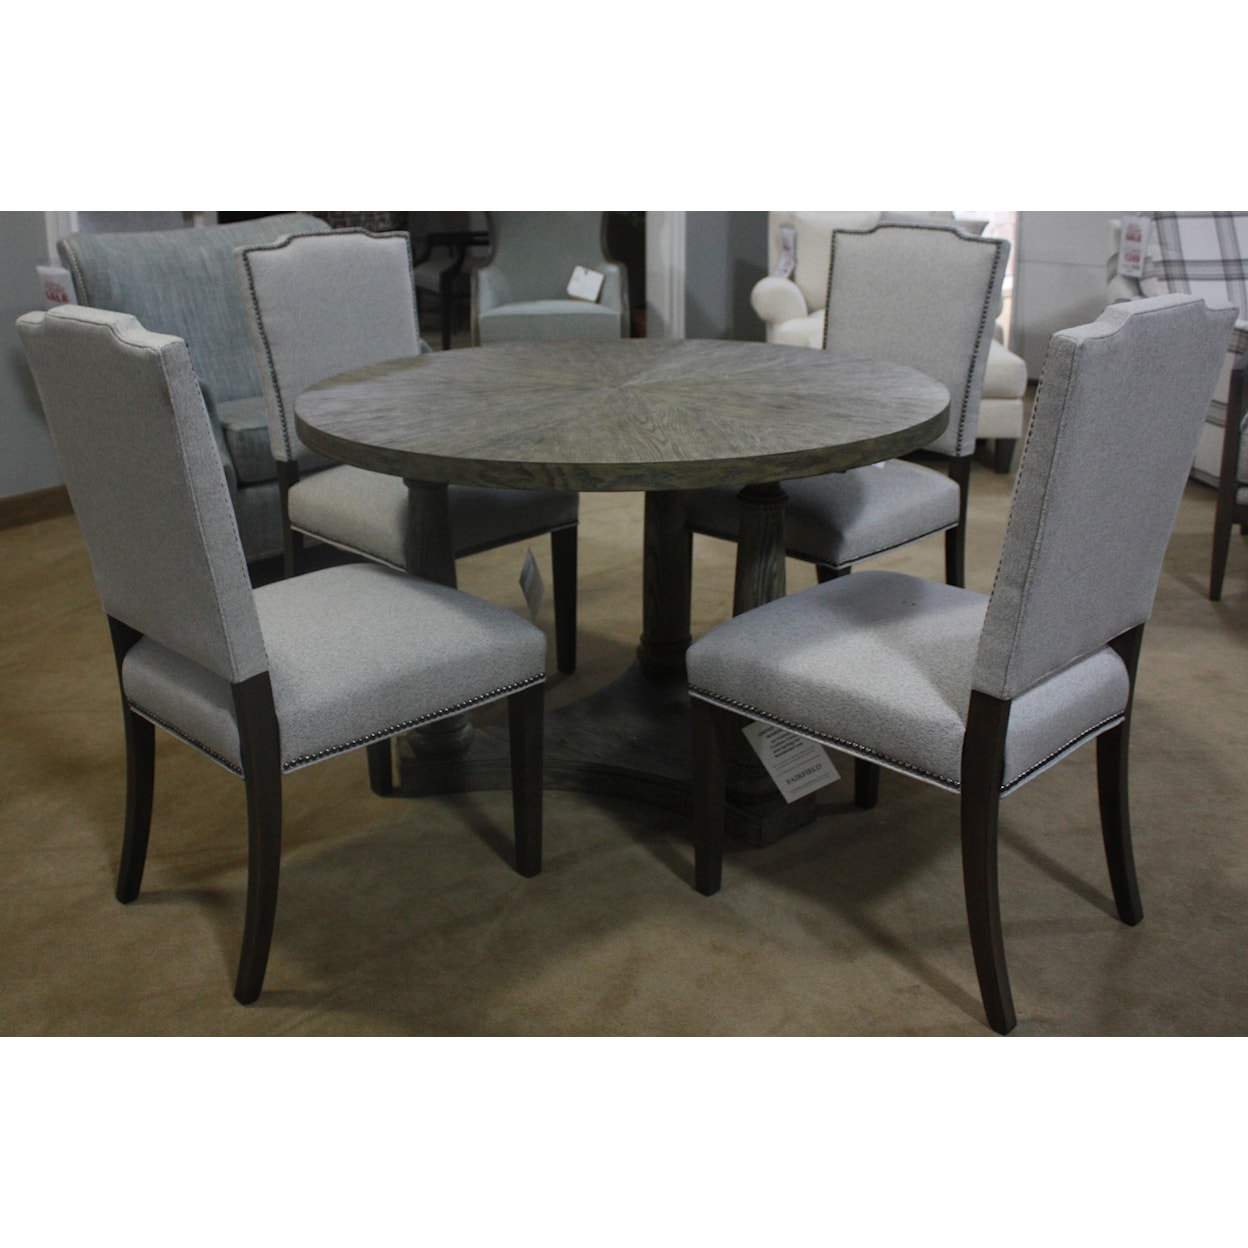 Fairfield Monogram Program Dining Table with Upholstered Side Chairs